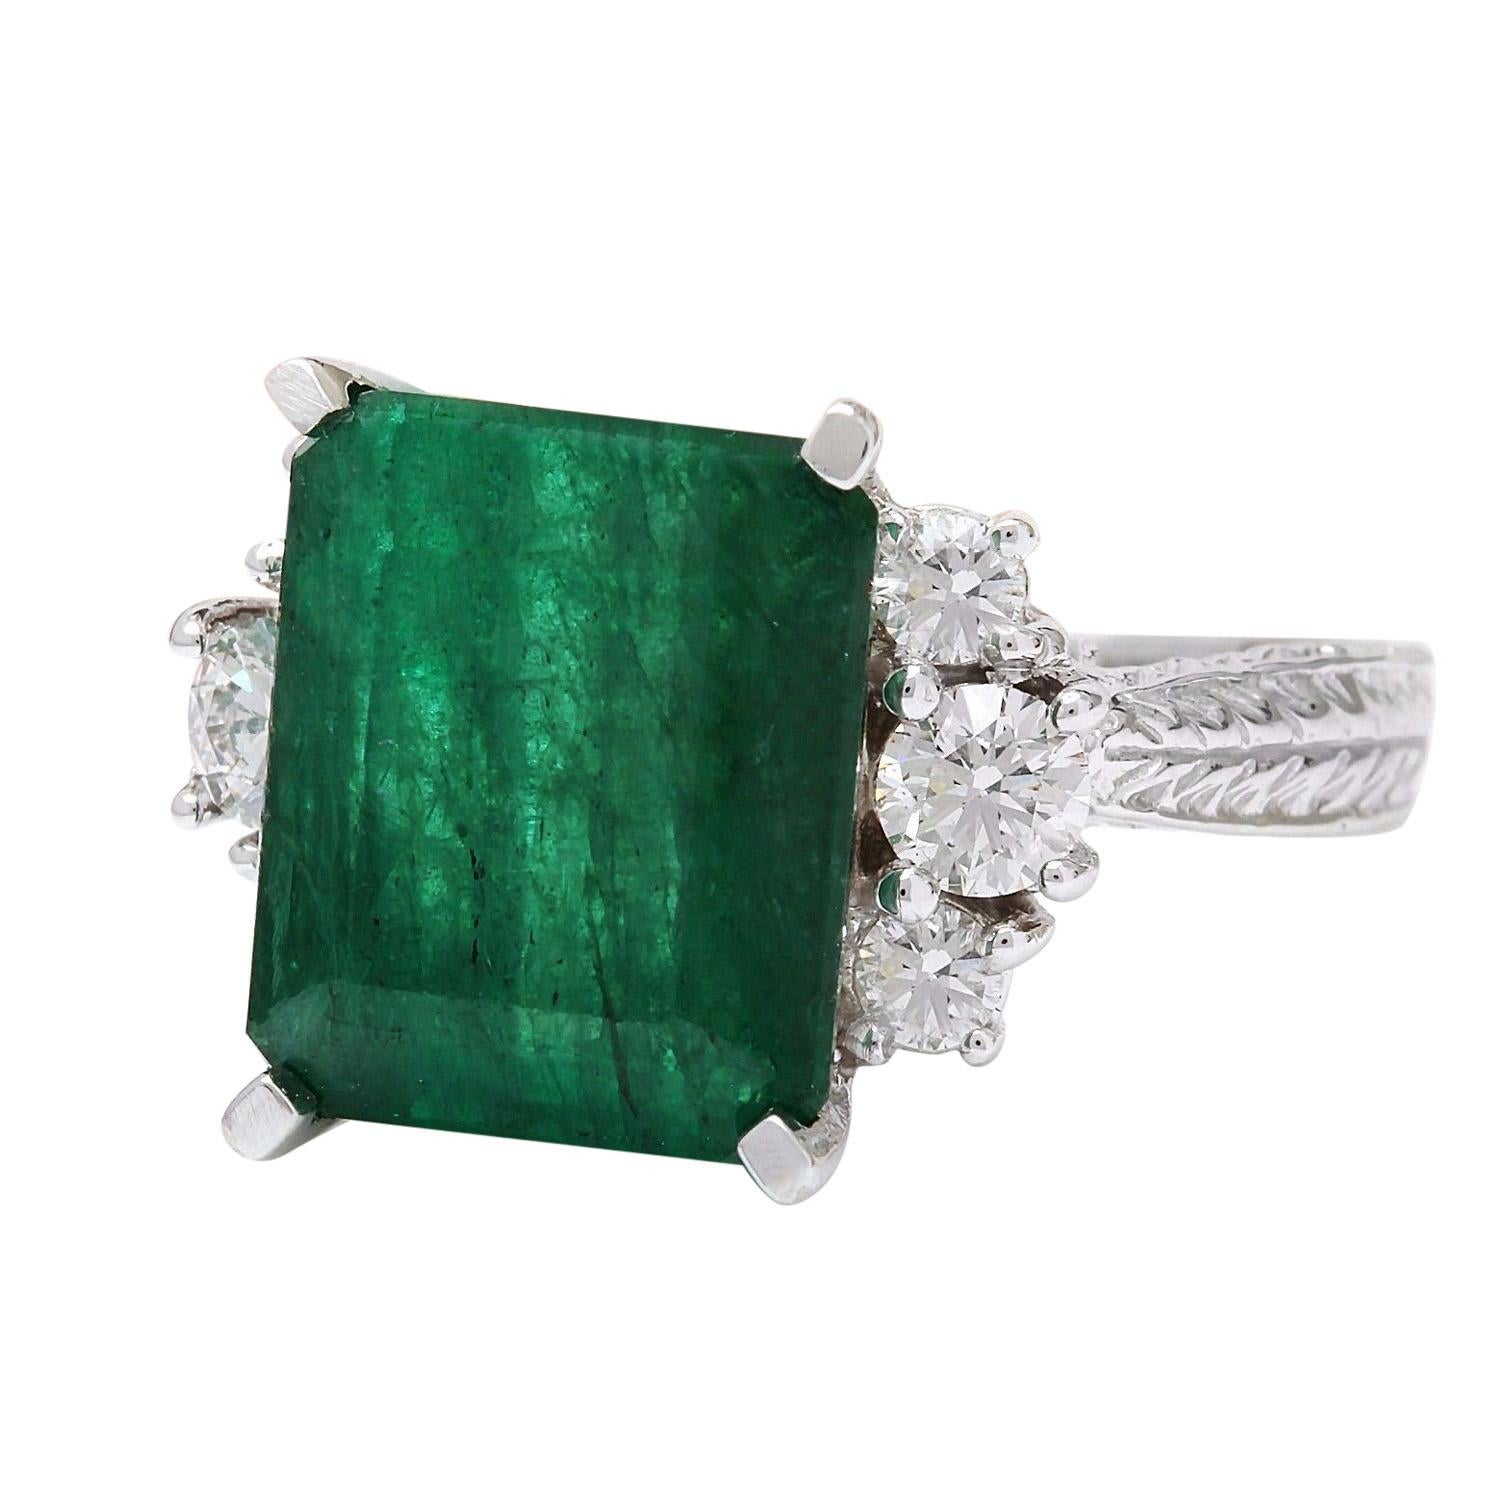 6.10 Carat Natural Emerald 14K Solid White Gold Diamond Ring
 Item Type: Ring
 Item Style: Engagement
 Material: 14K White Gold
 Mainstone: Emerald
 Stone Color: Green
 Stone Weight: 5.50 Carat
 Stone Shape: Emerald
 Stone Quantity: 1
 Stone